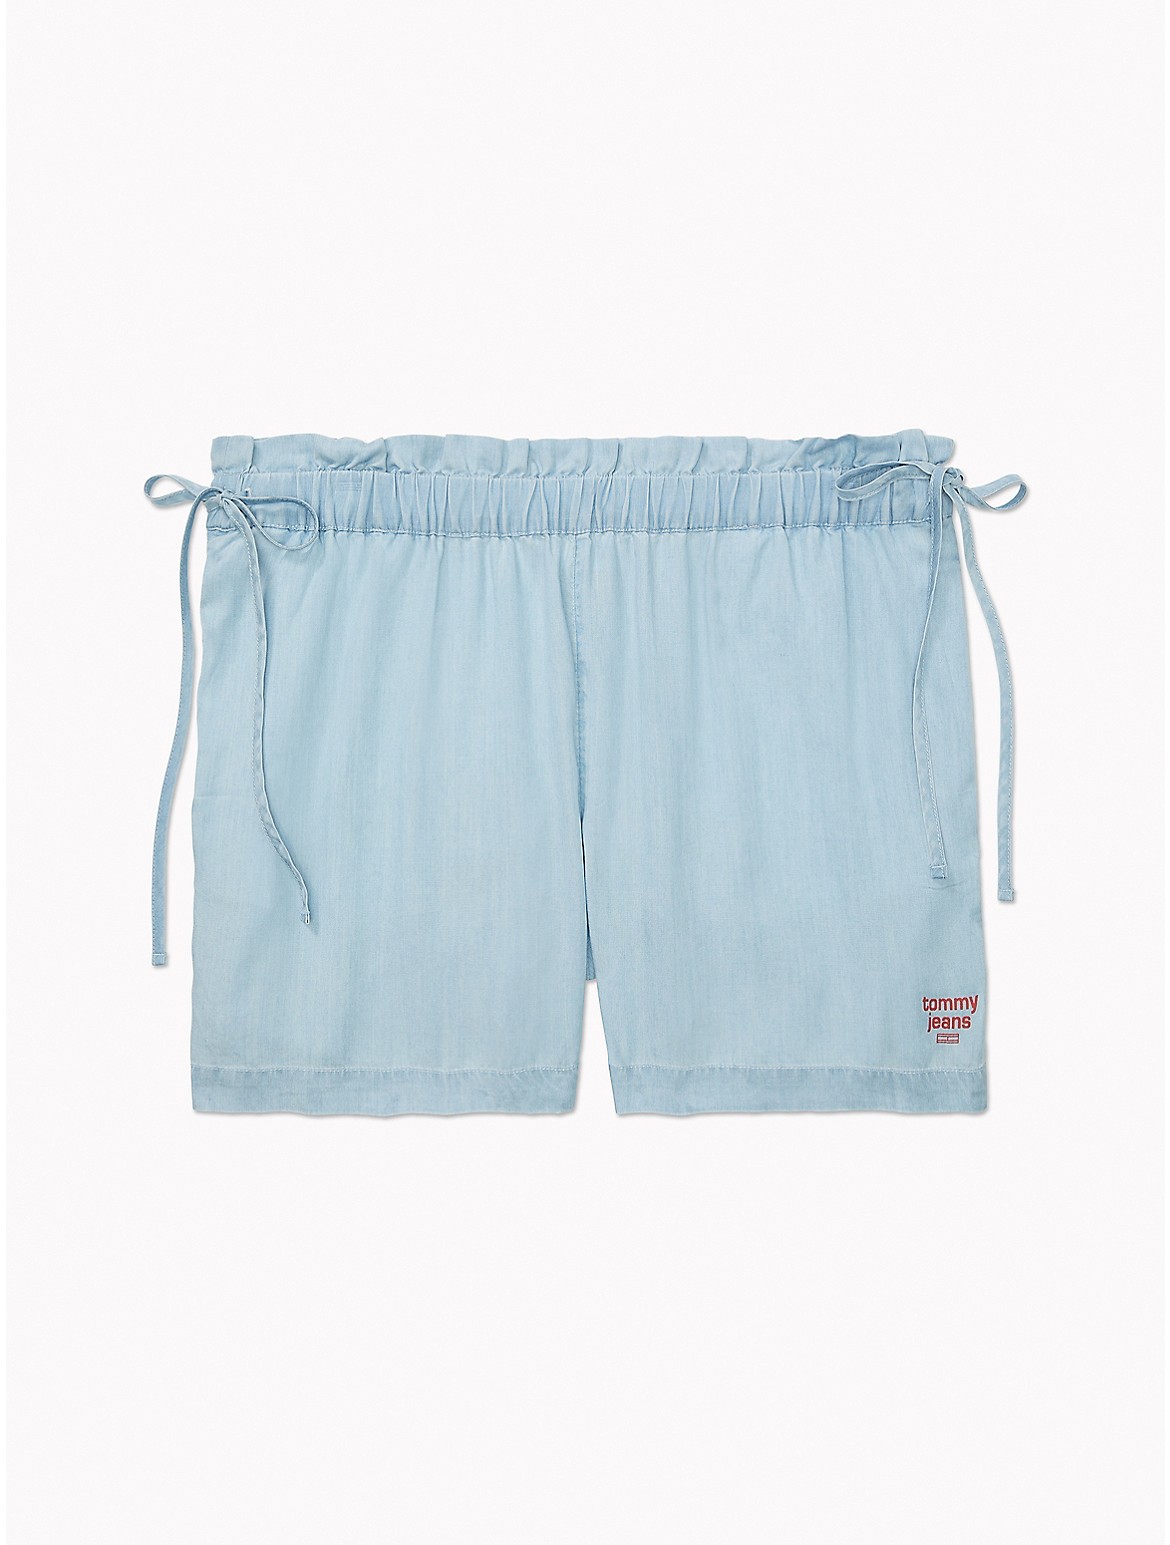 Tommy Hilfiger Chambray Short In Light Wash